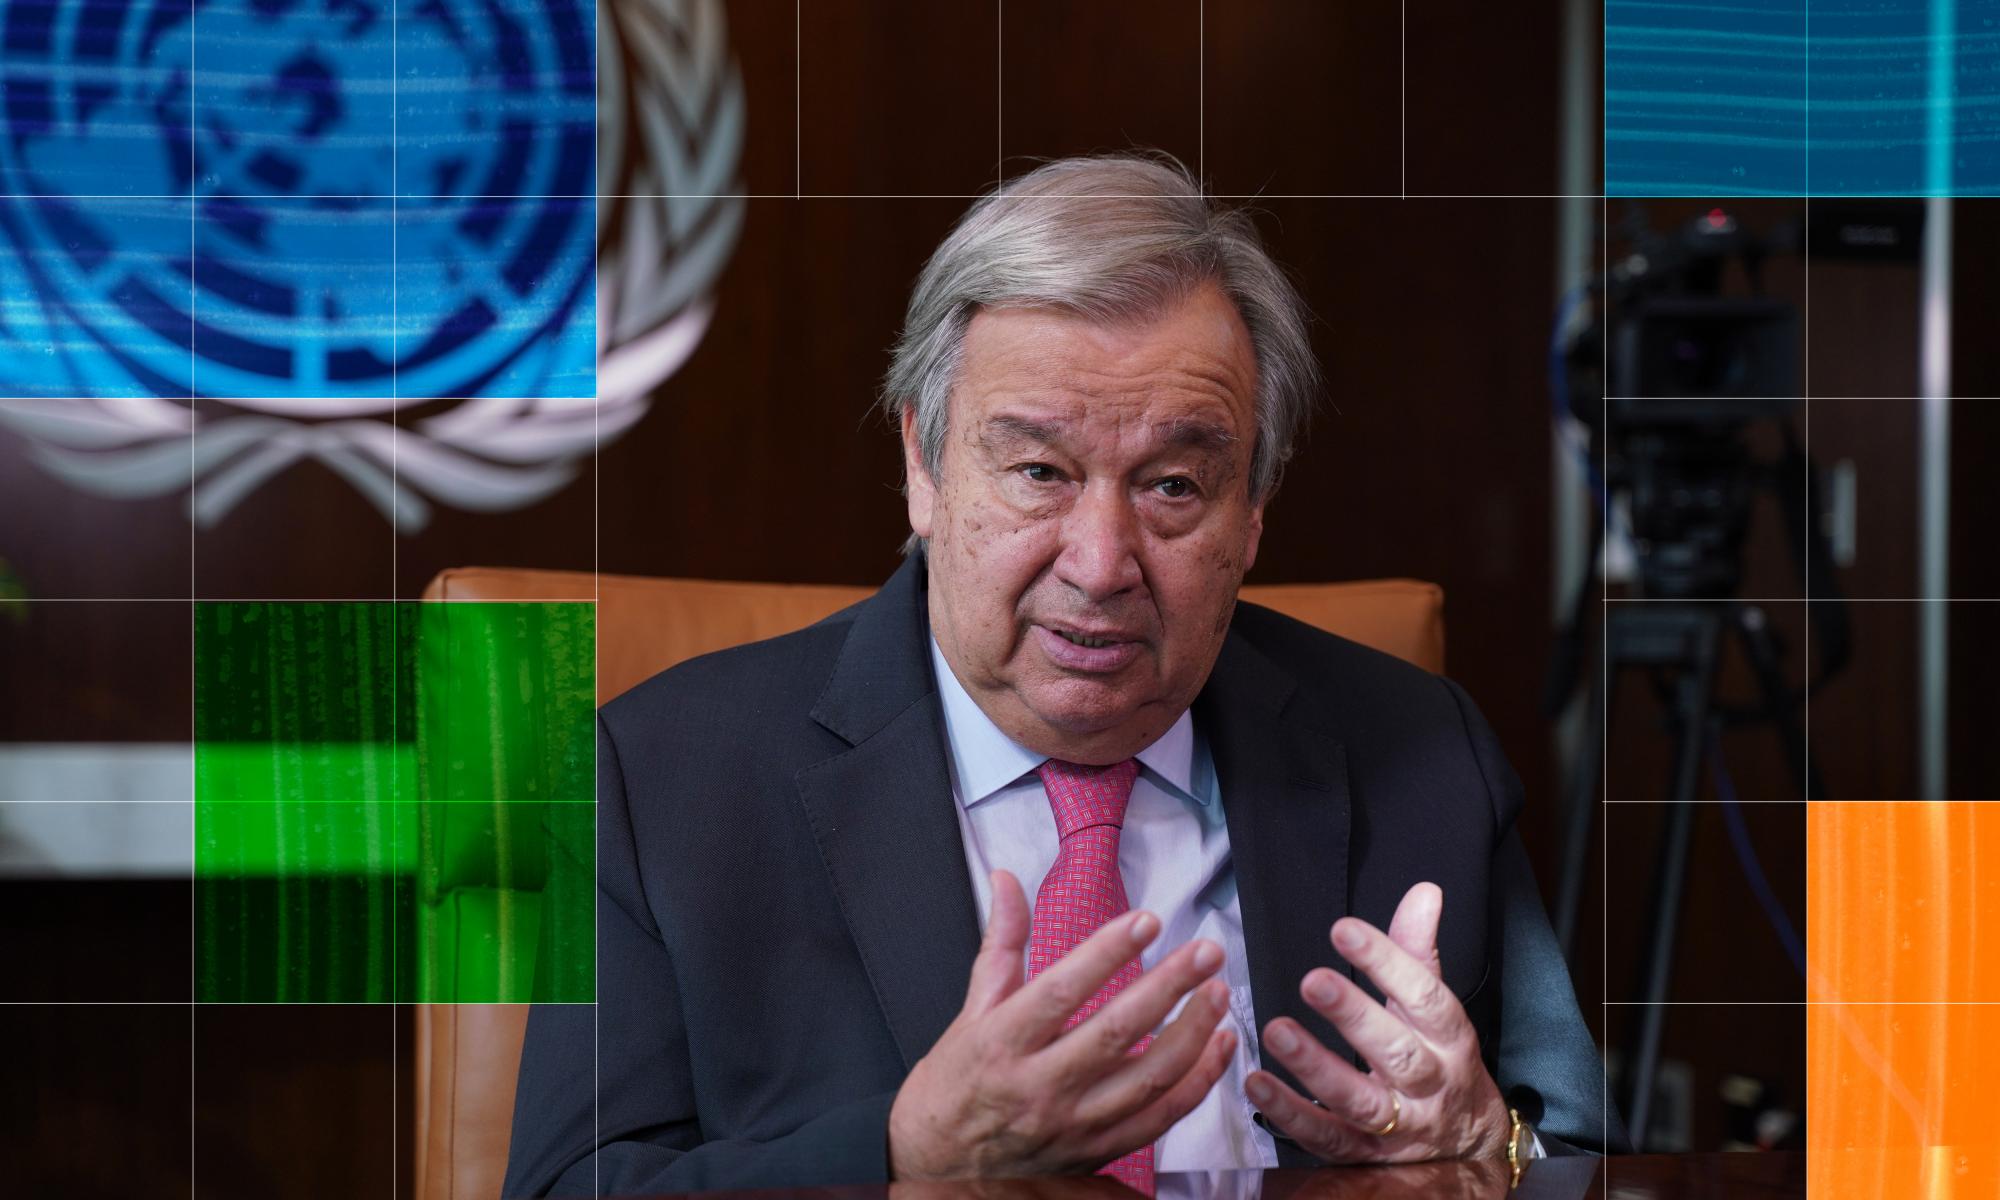 How UN secretary general became an outspoken voice for climate action